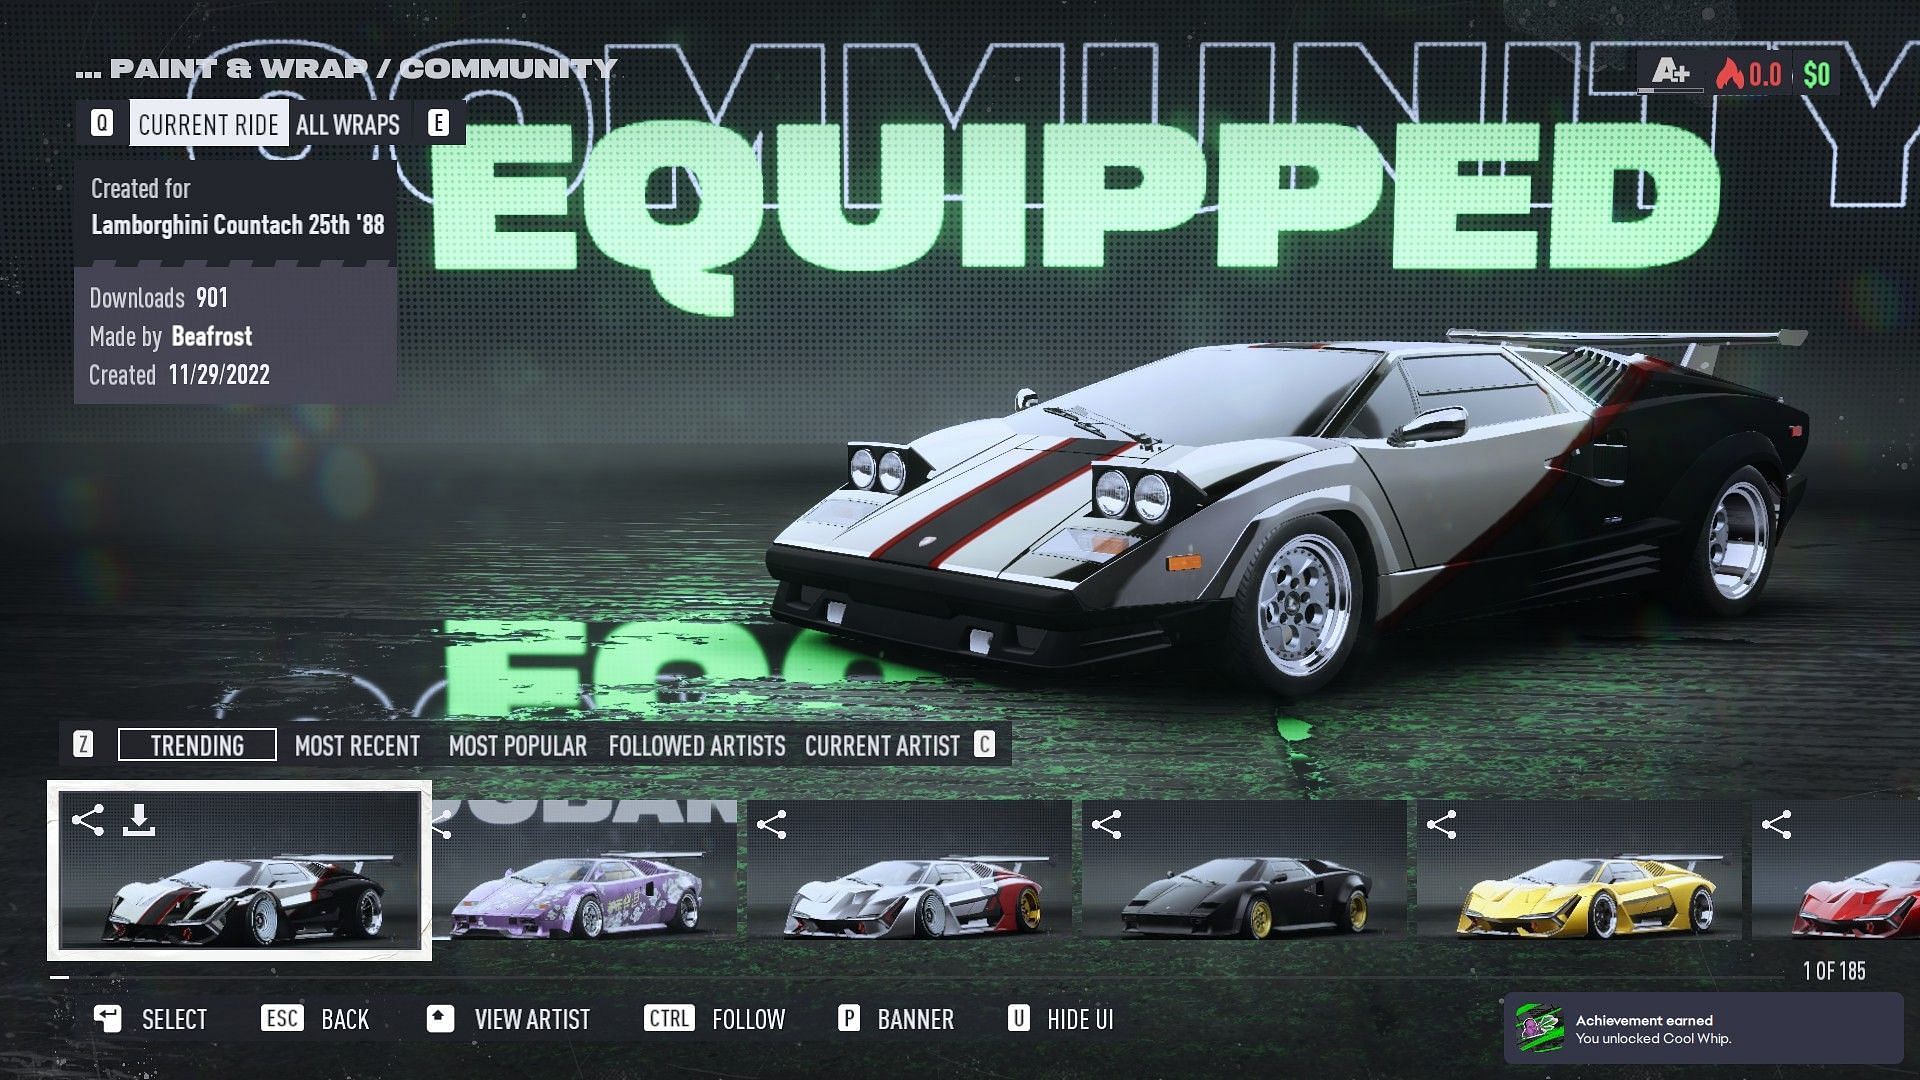 Community liveries are back in Need for Speed Unbound (Image via Criterion Games, Electronic Arts)